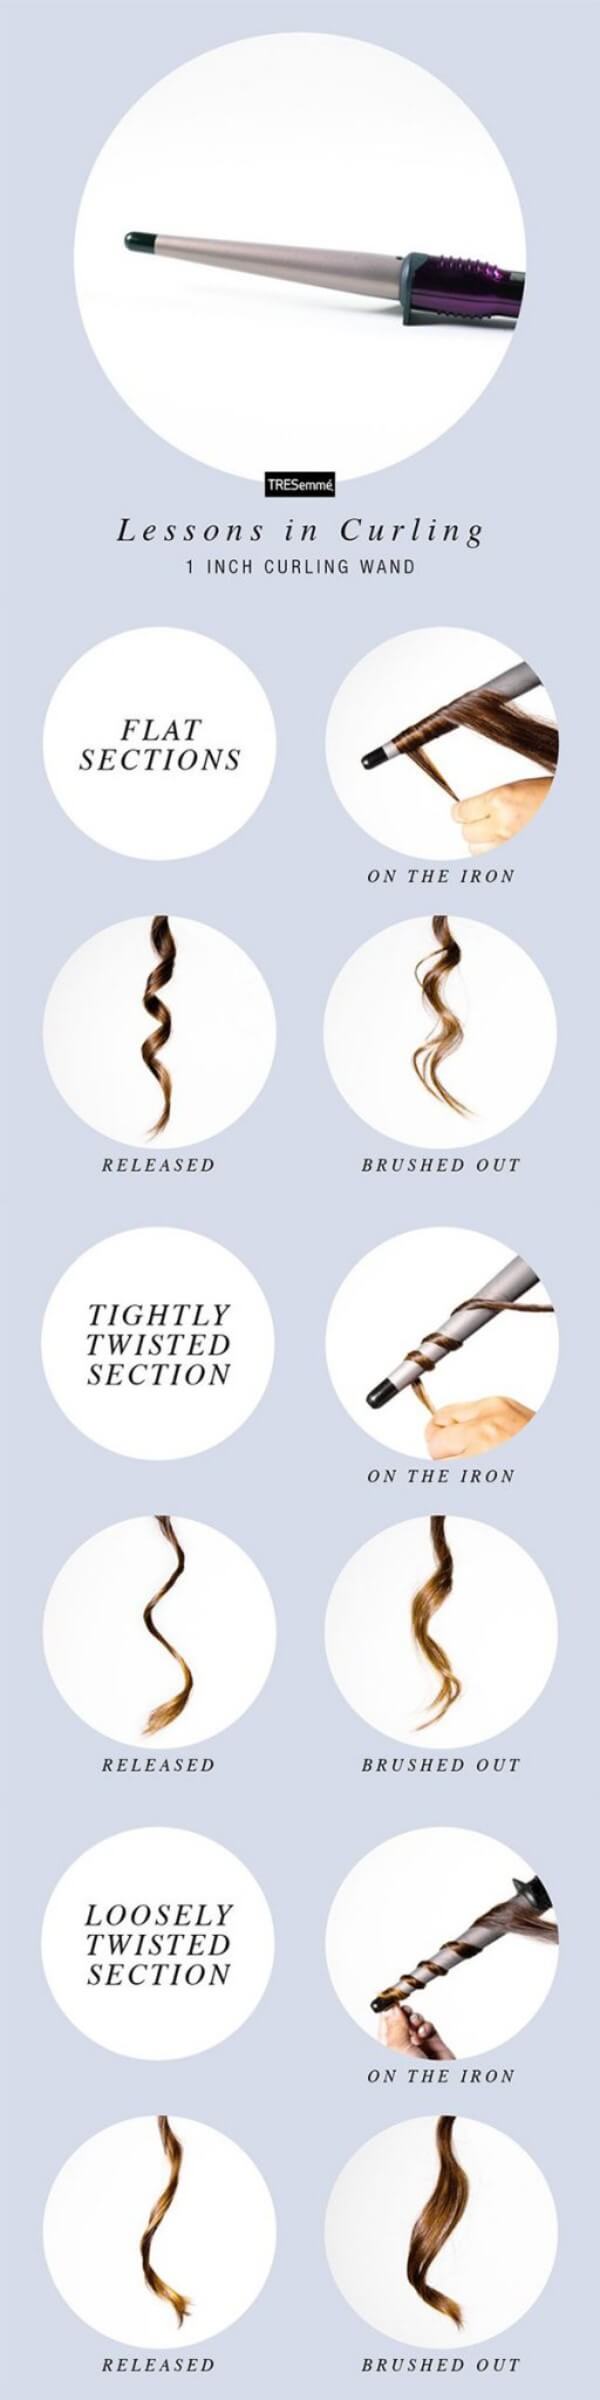 Lesson in Curling Ways to Curl Your Hairs: Step by Step Guide